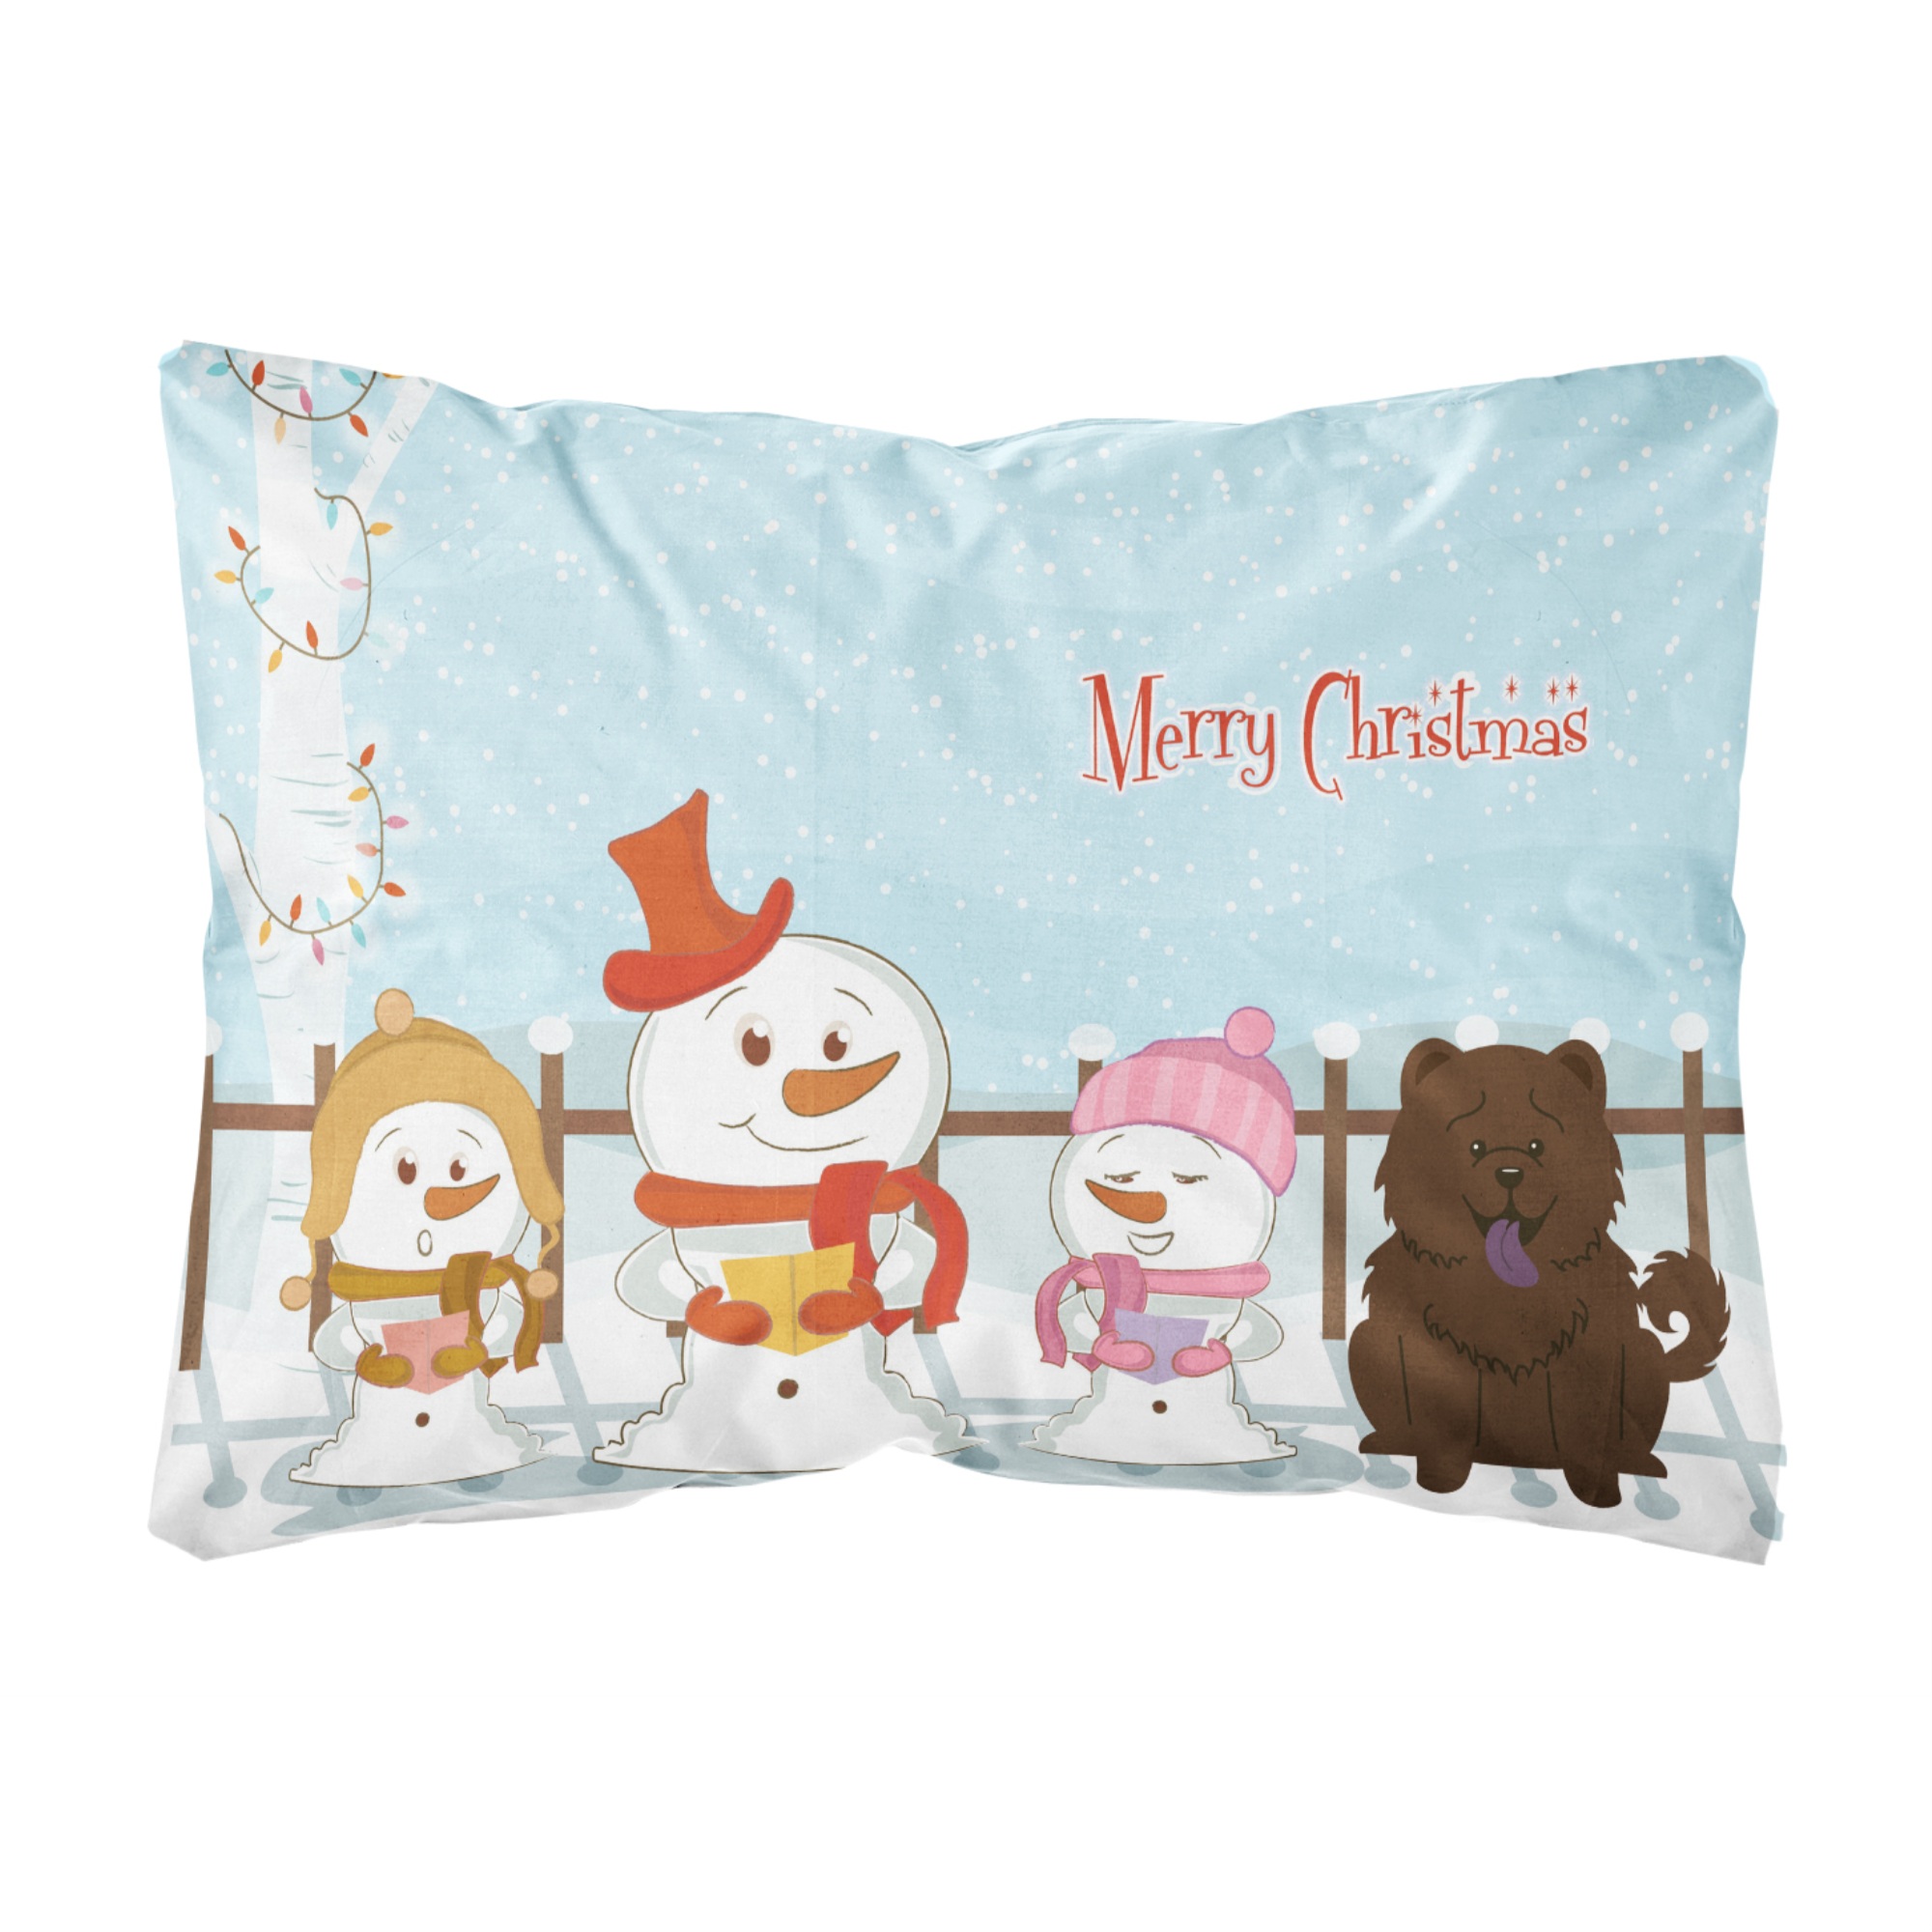 Caroline's Treasures "Caroline's Treasures BB2472PW1216 Merry Christmas Carolers Chow Chow Chocolate Canvas Fabric Decorative Pillow, 12"" H x 16"" W